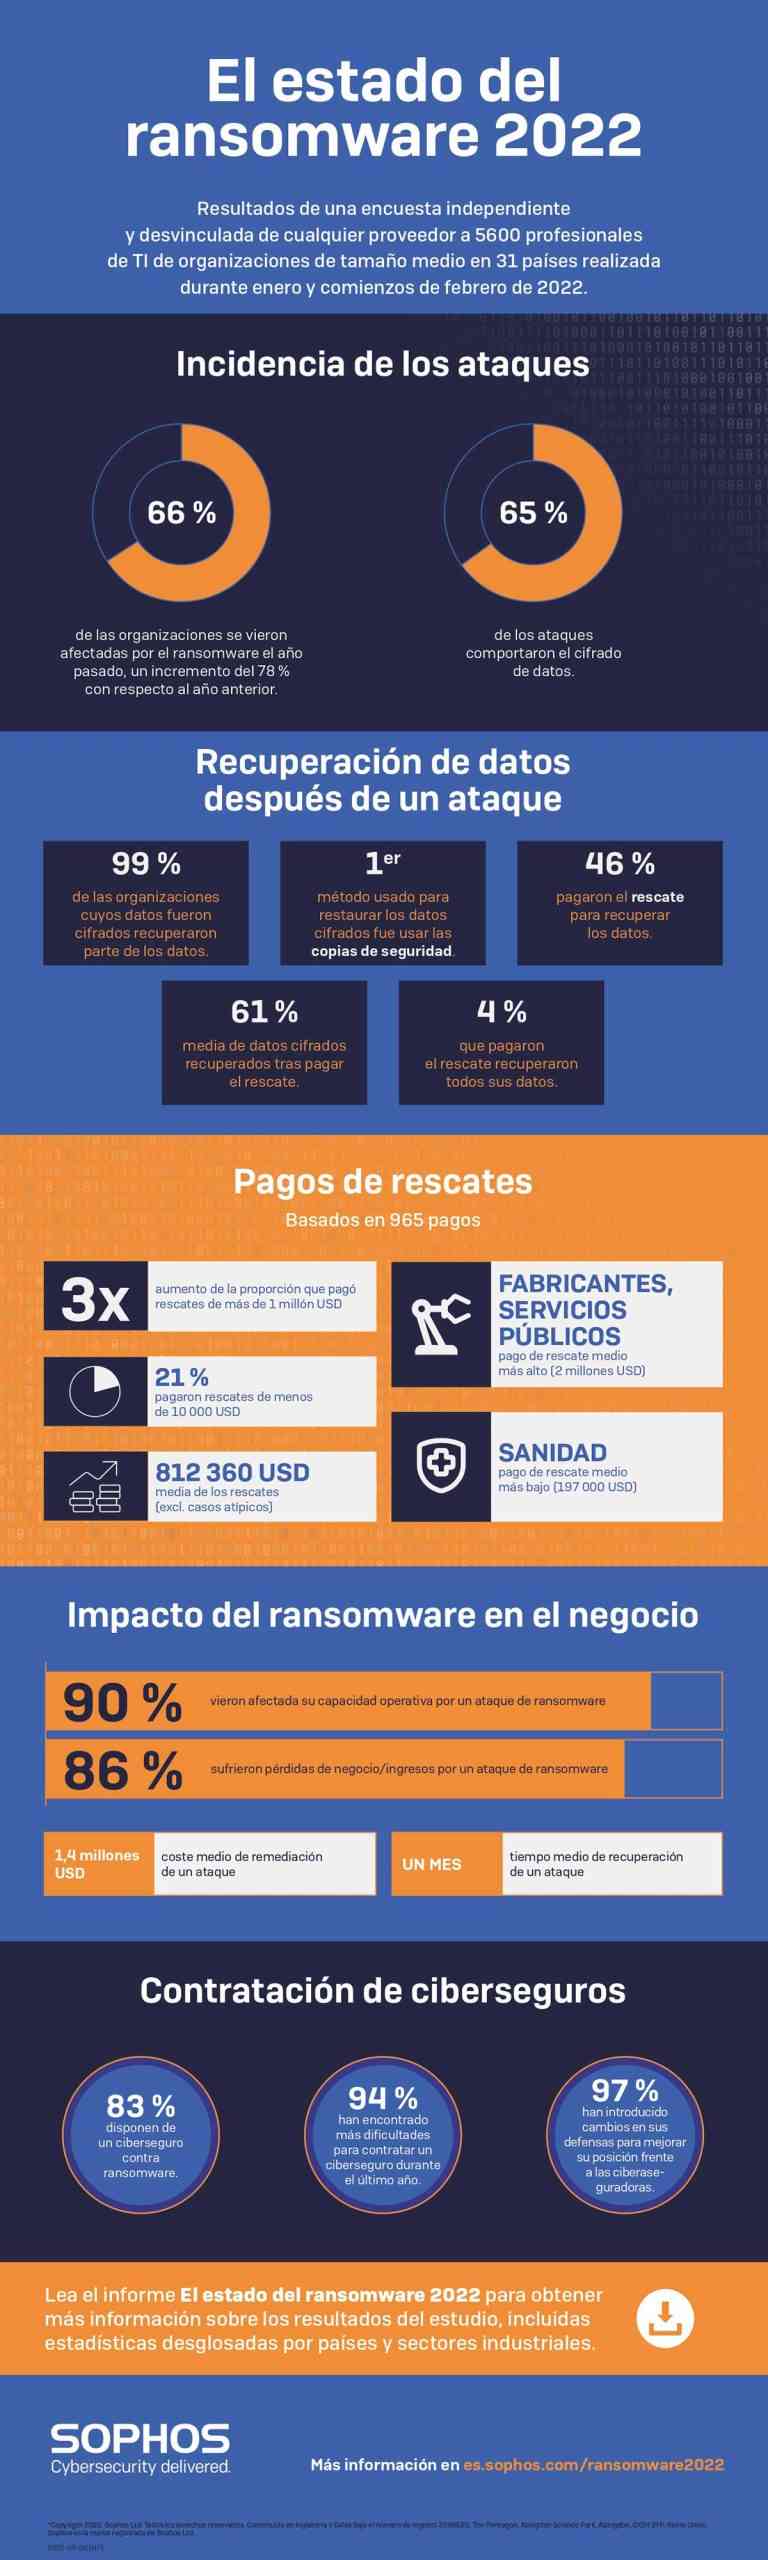 sophos state of ransomware infographic es page 0002 scaled